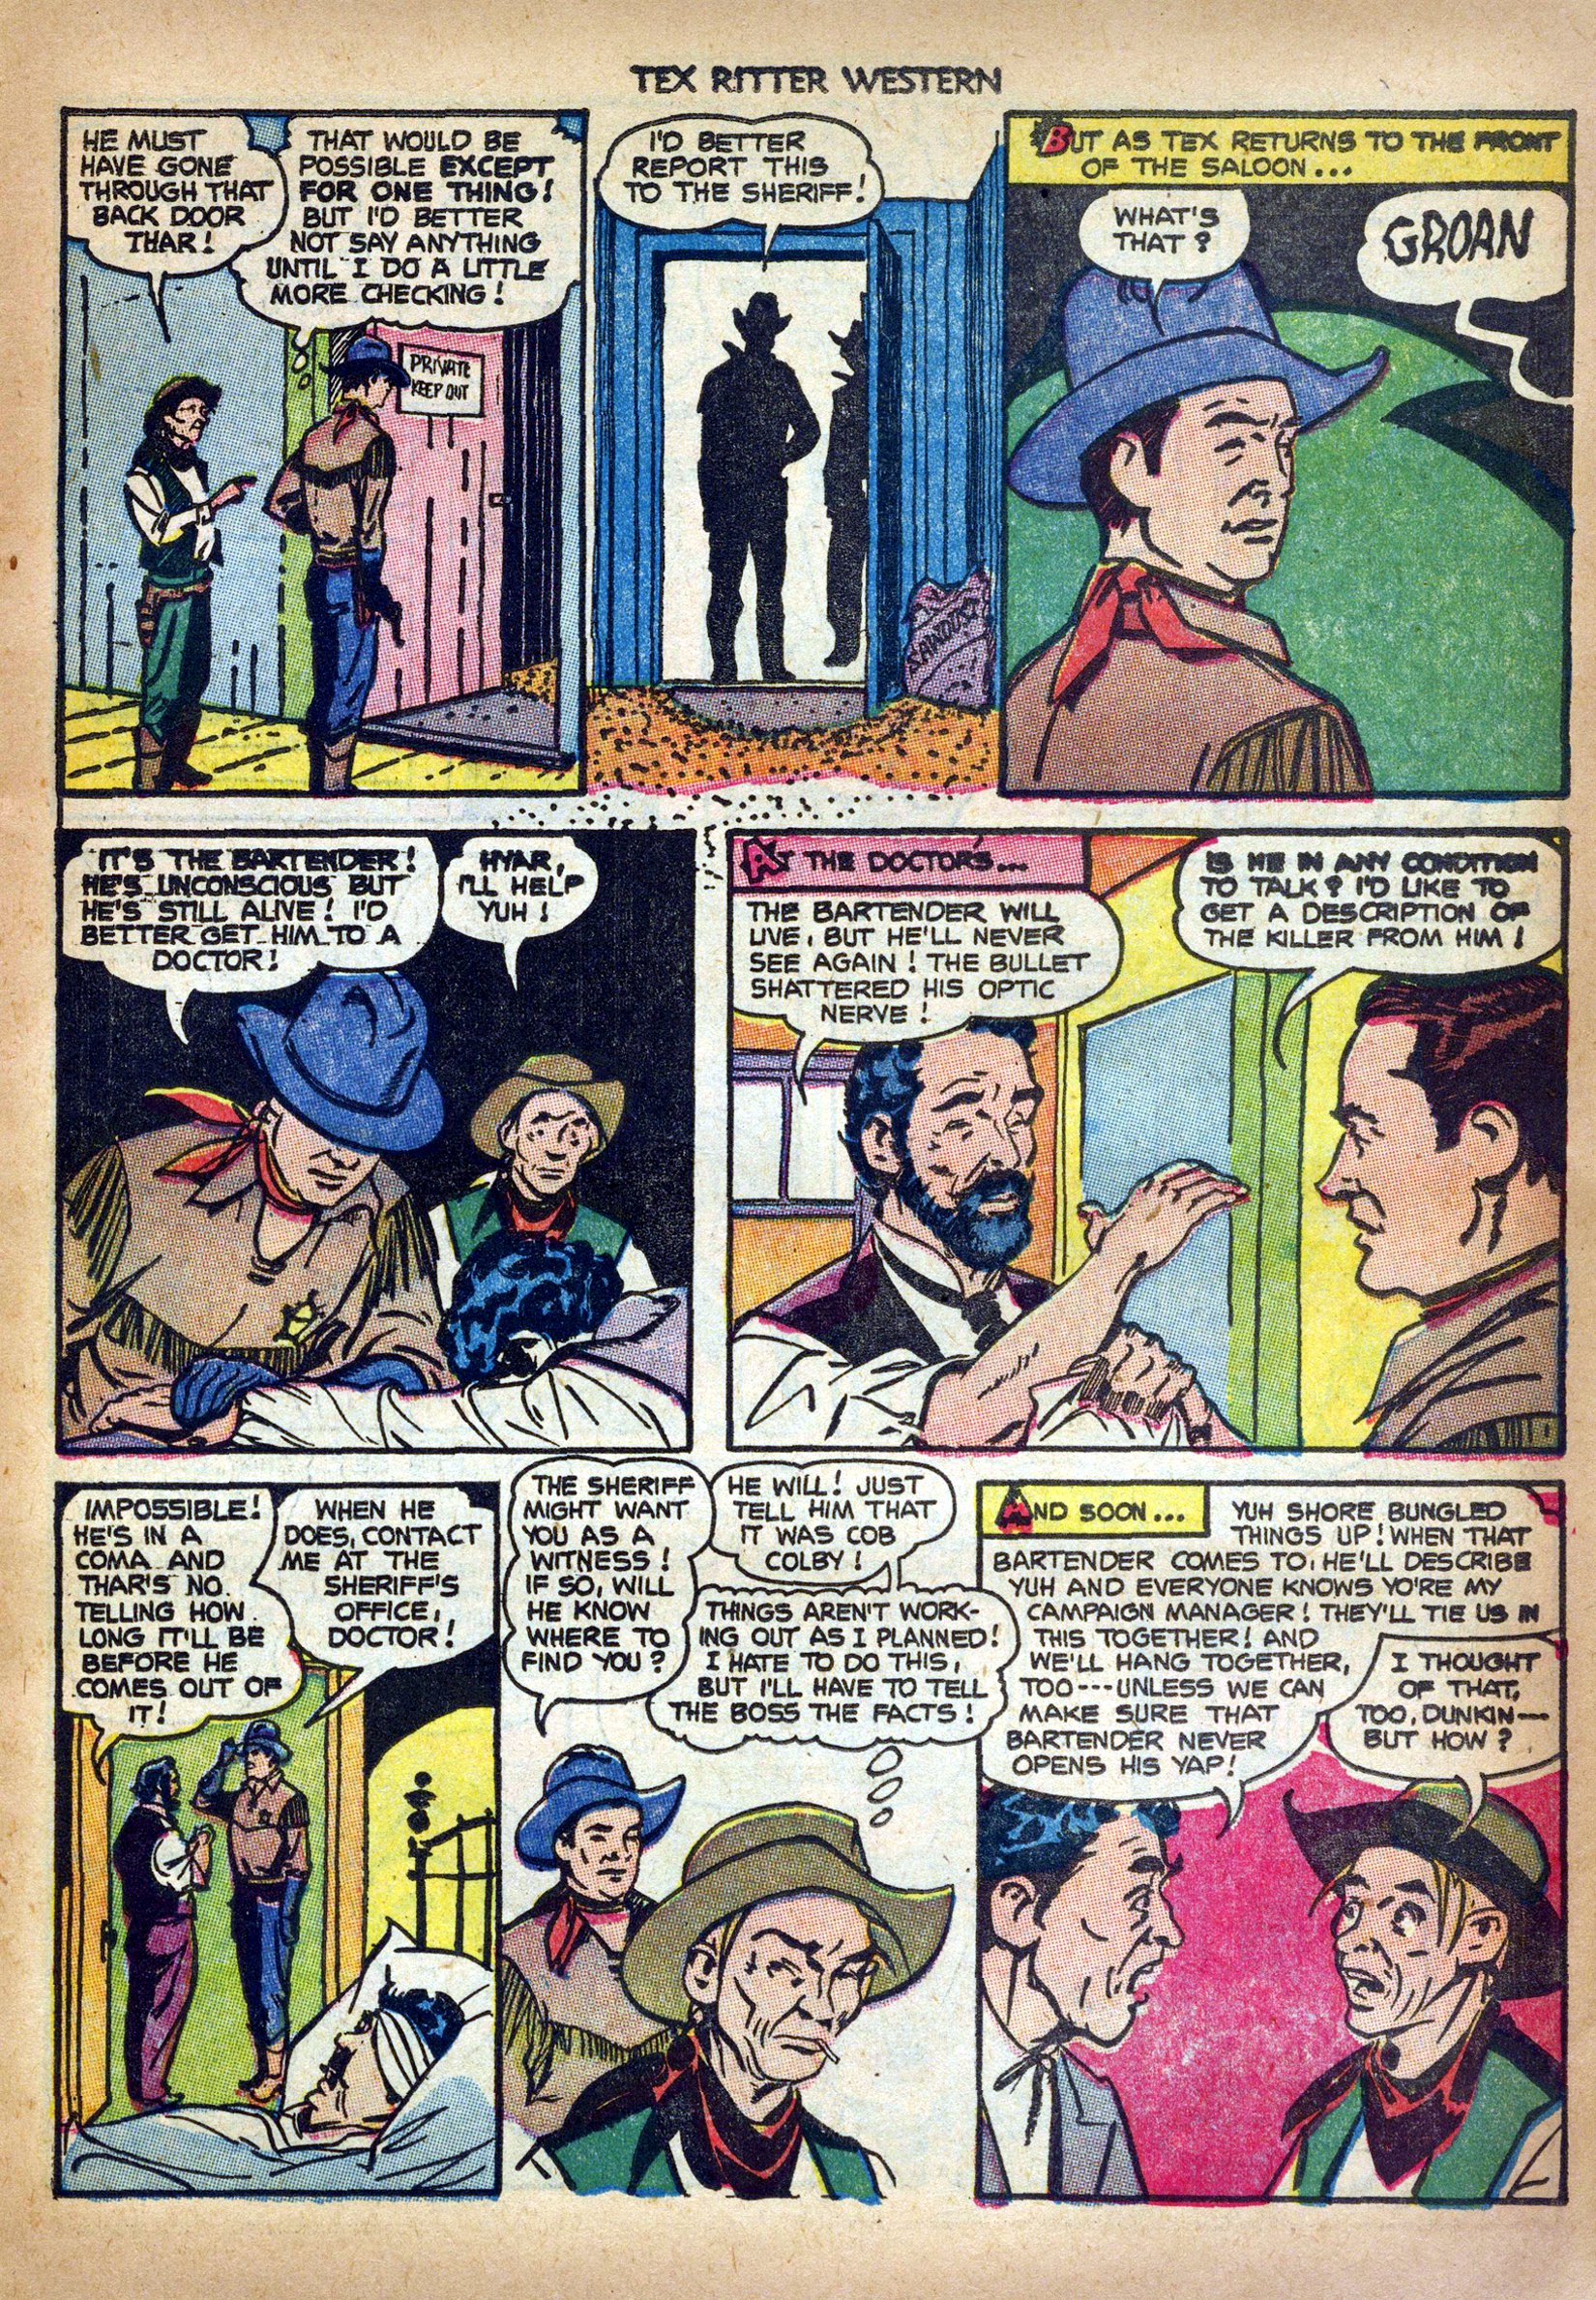 Read online Tex Ritter Western comic -  Issue #19 - 11